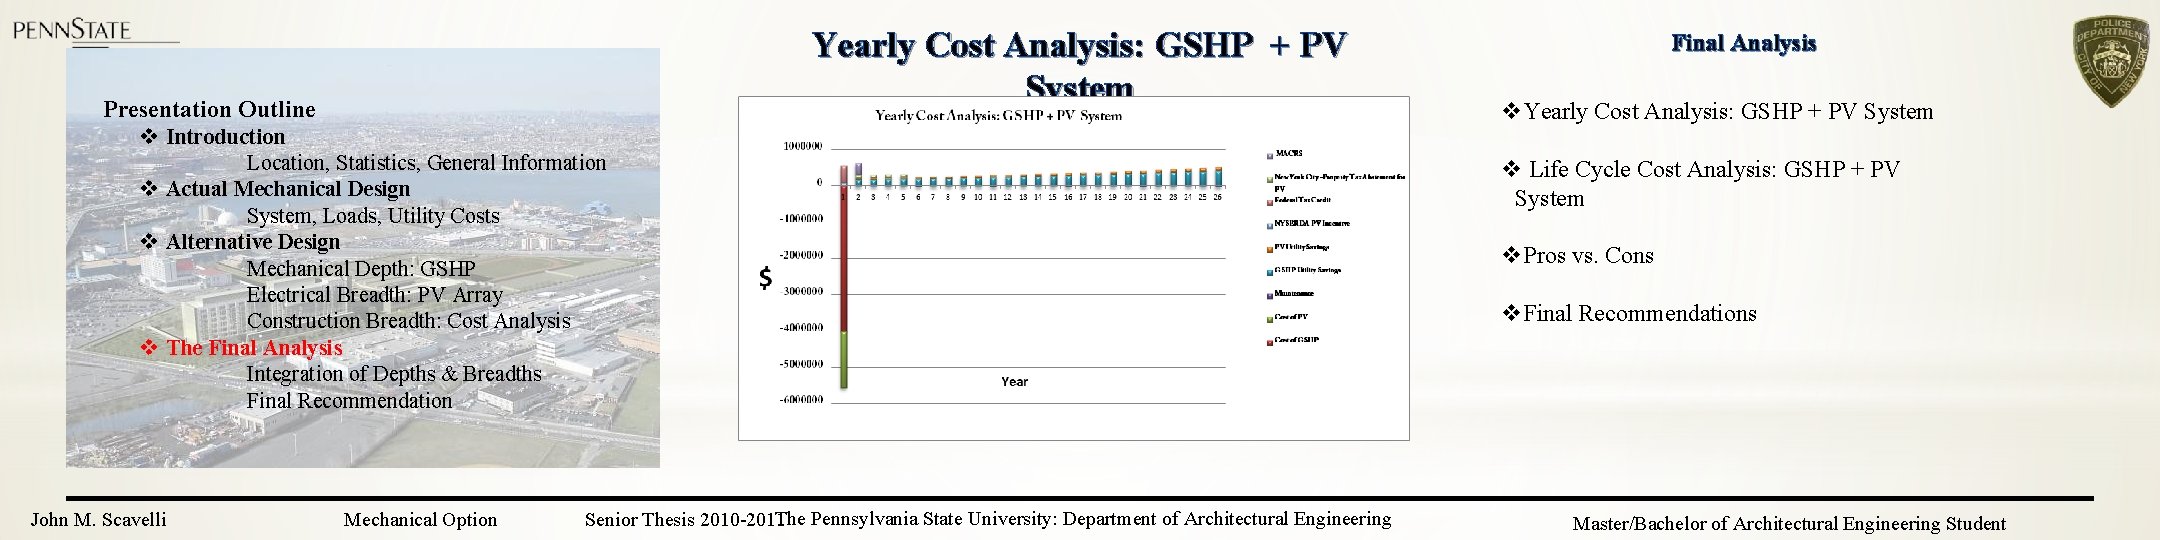 Yearly Cost Analysis: GSHP + PV System Presentation Outline v Introduction Location, Statistics, General